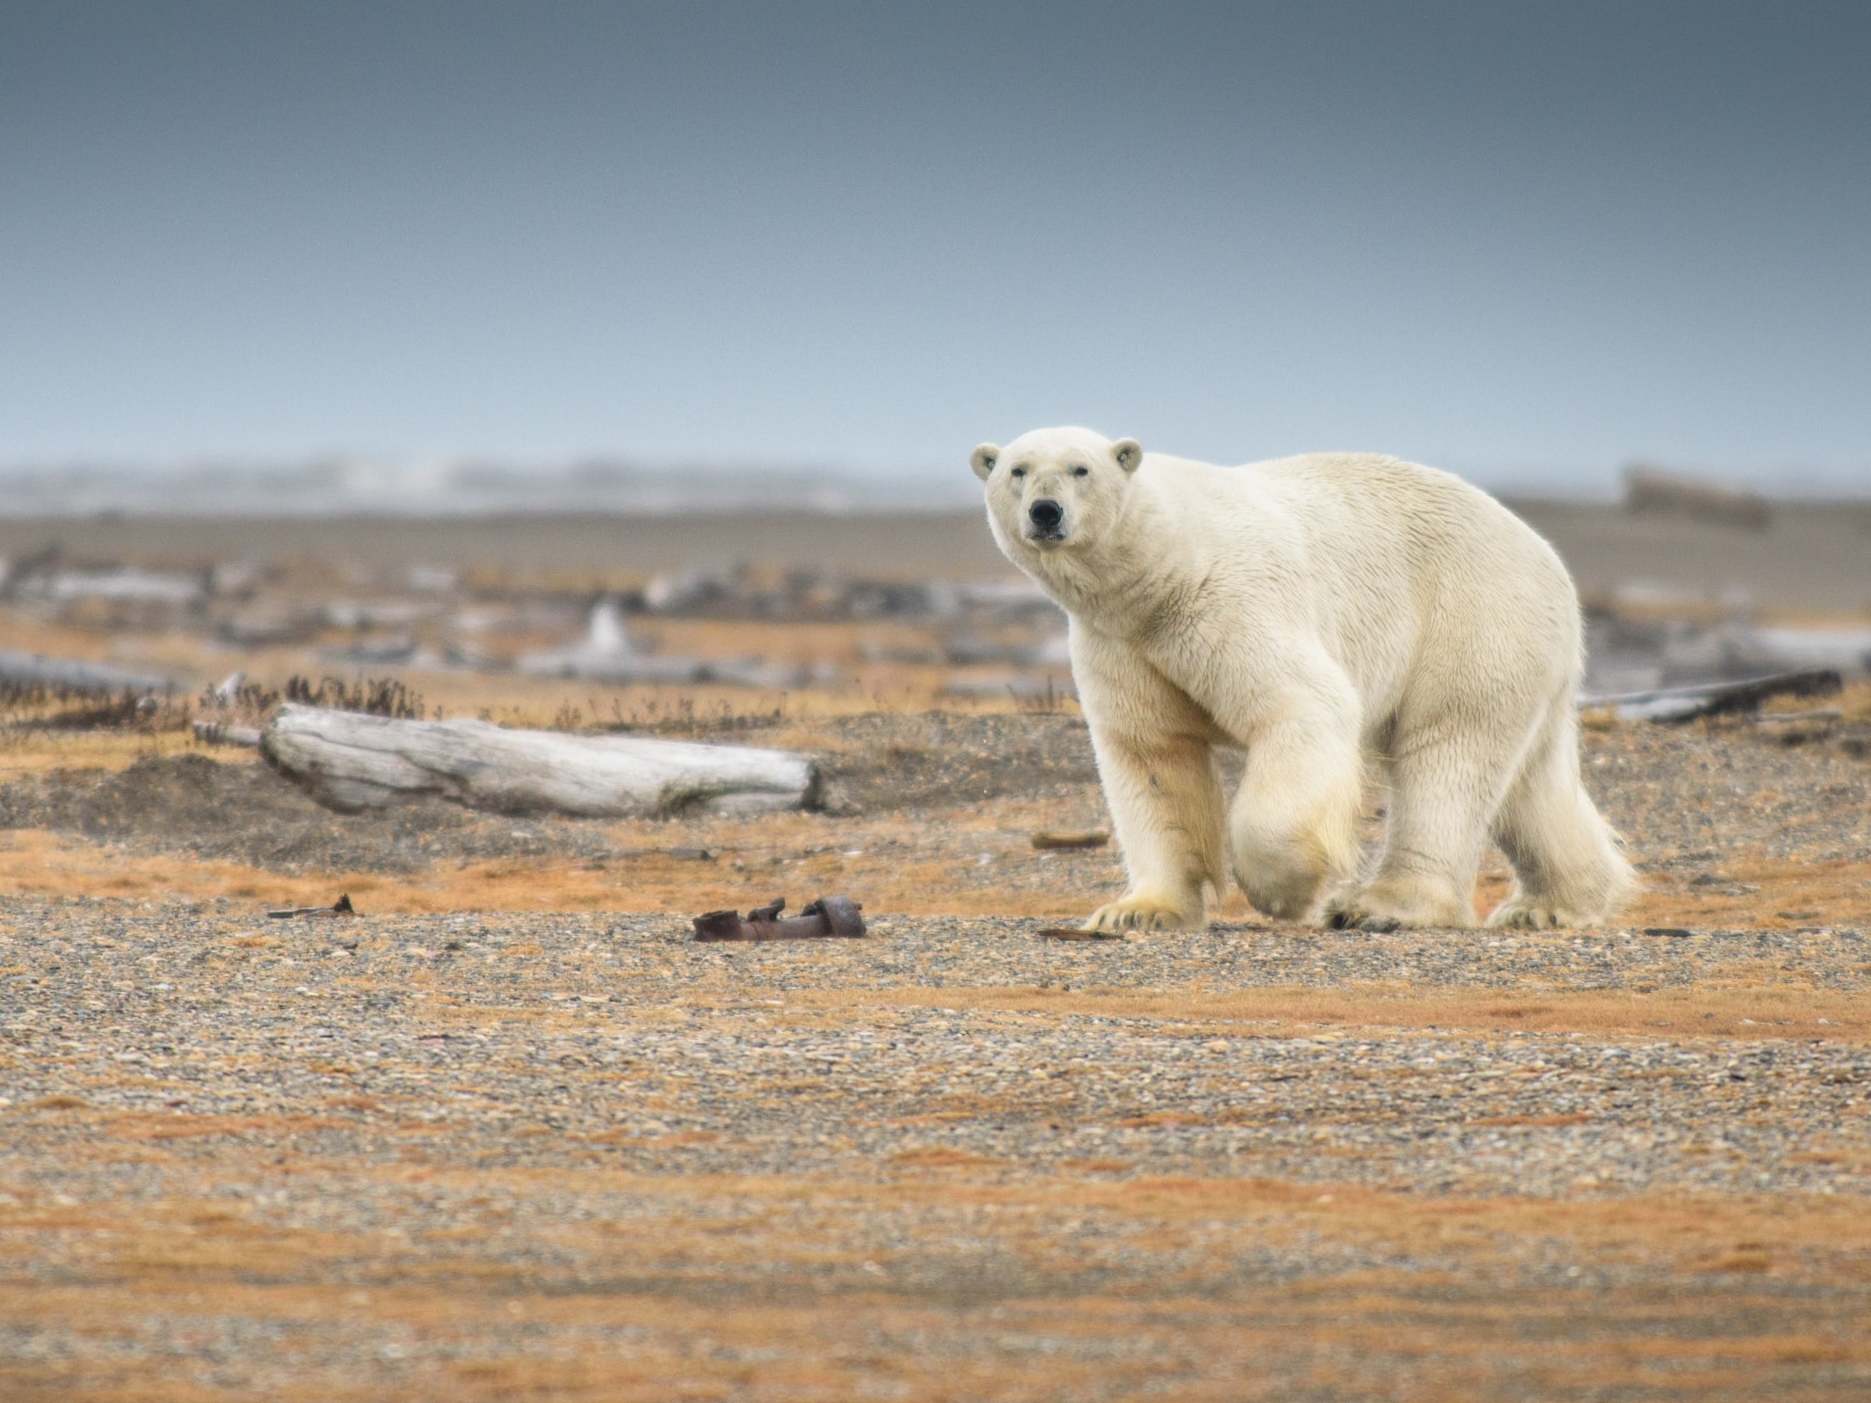 Polar bears have seen their habits drastically change in recent years